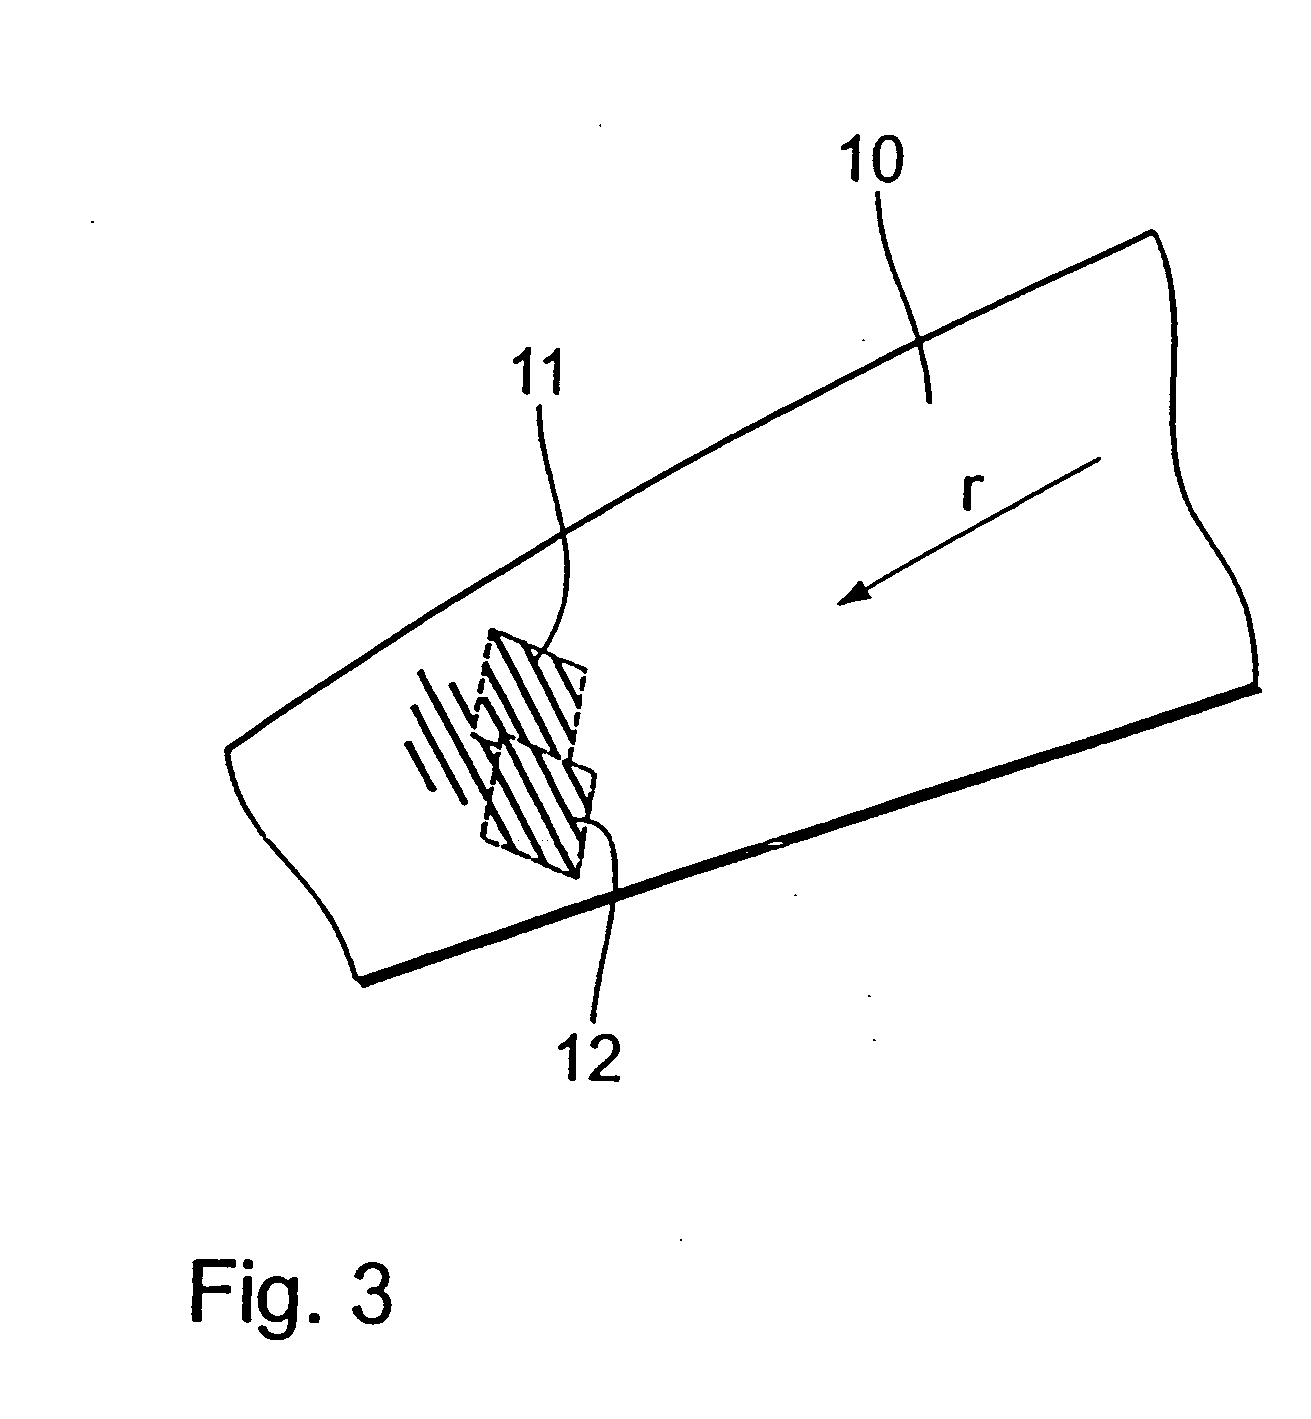 Reduction in the noise produced by a rotor blade of a wind turbine